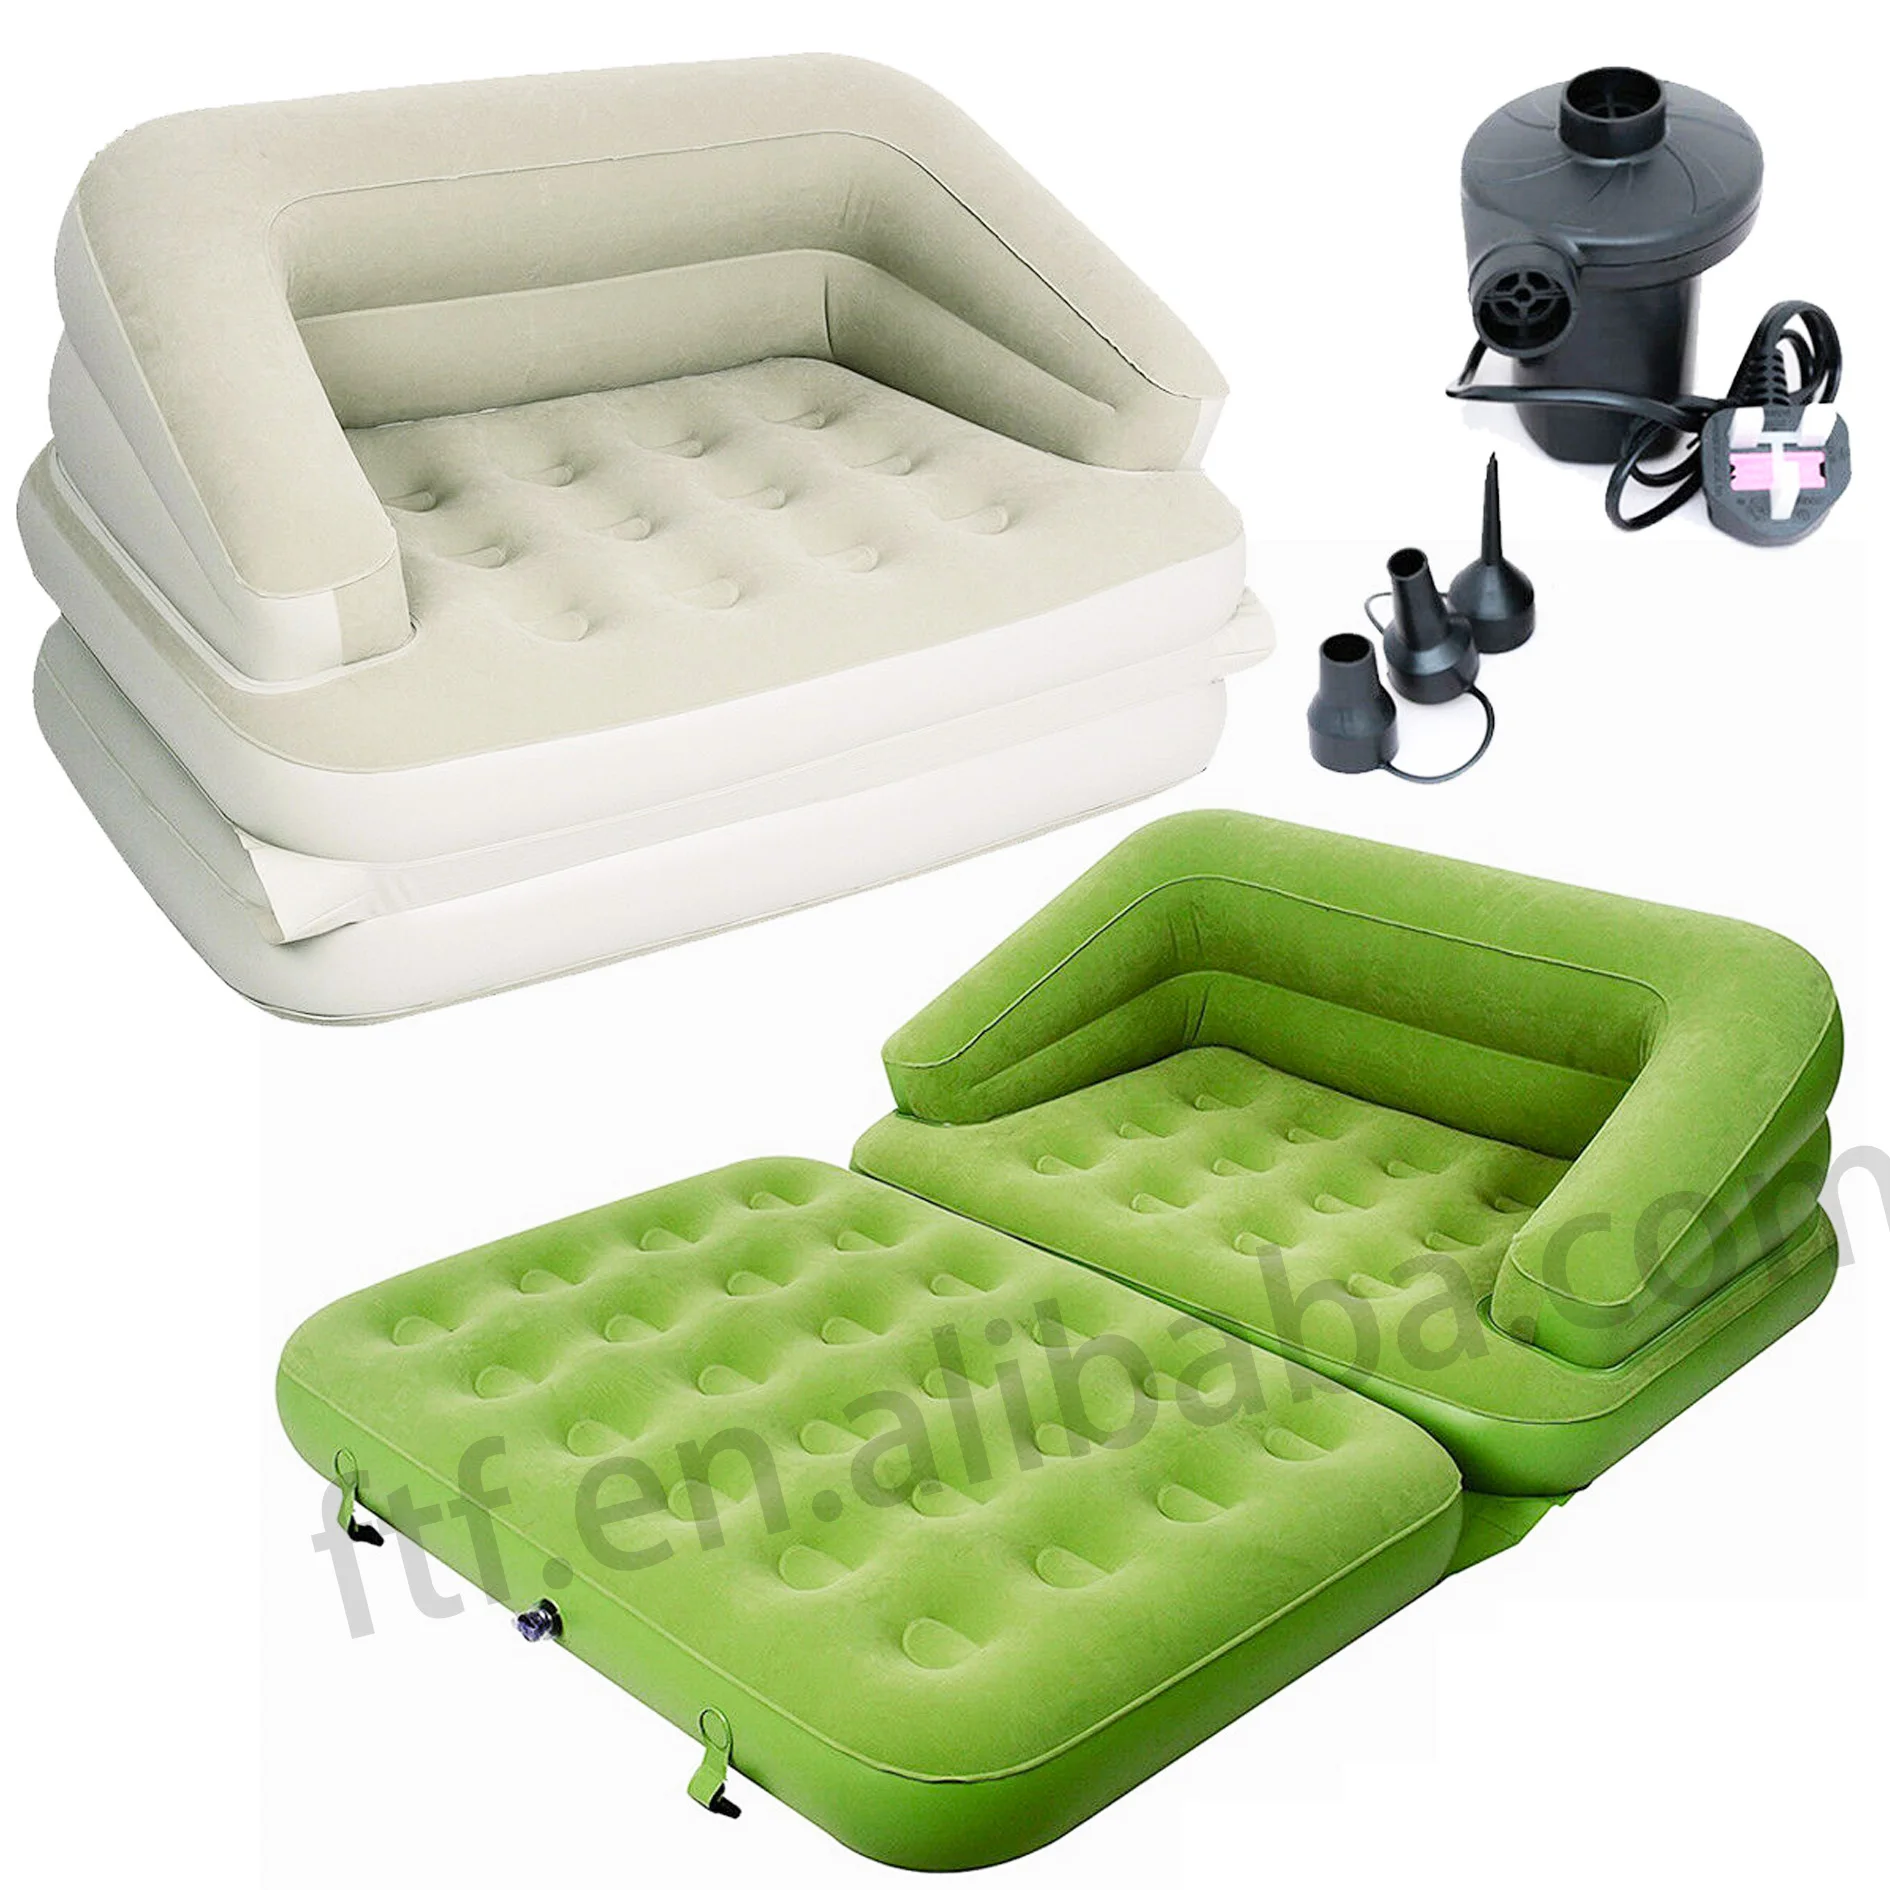 Jilong 5 in 1 Multi Functional Inflatable Sofa Air Bed Mattress Electric Pump for sale online 